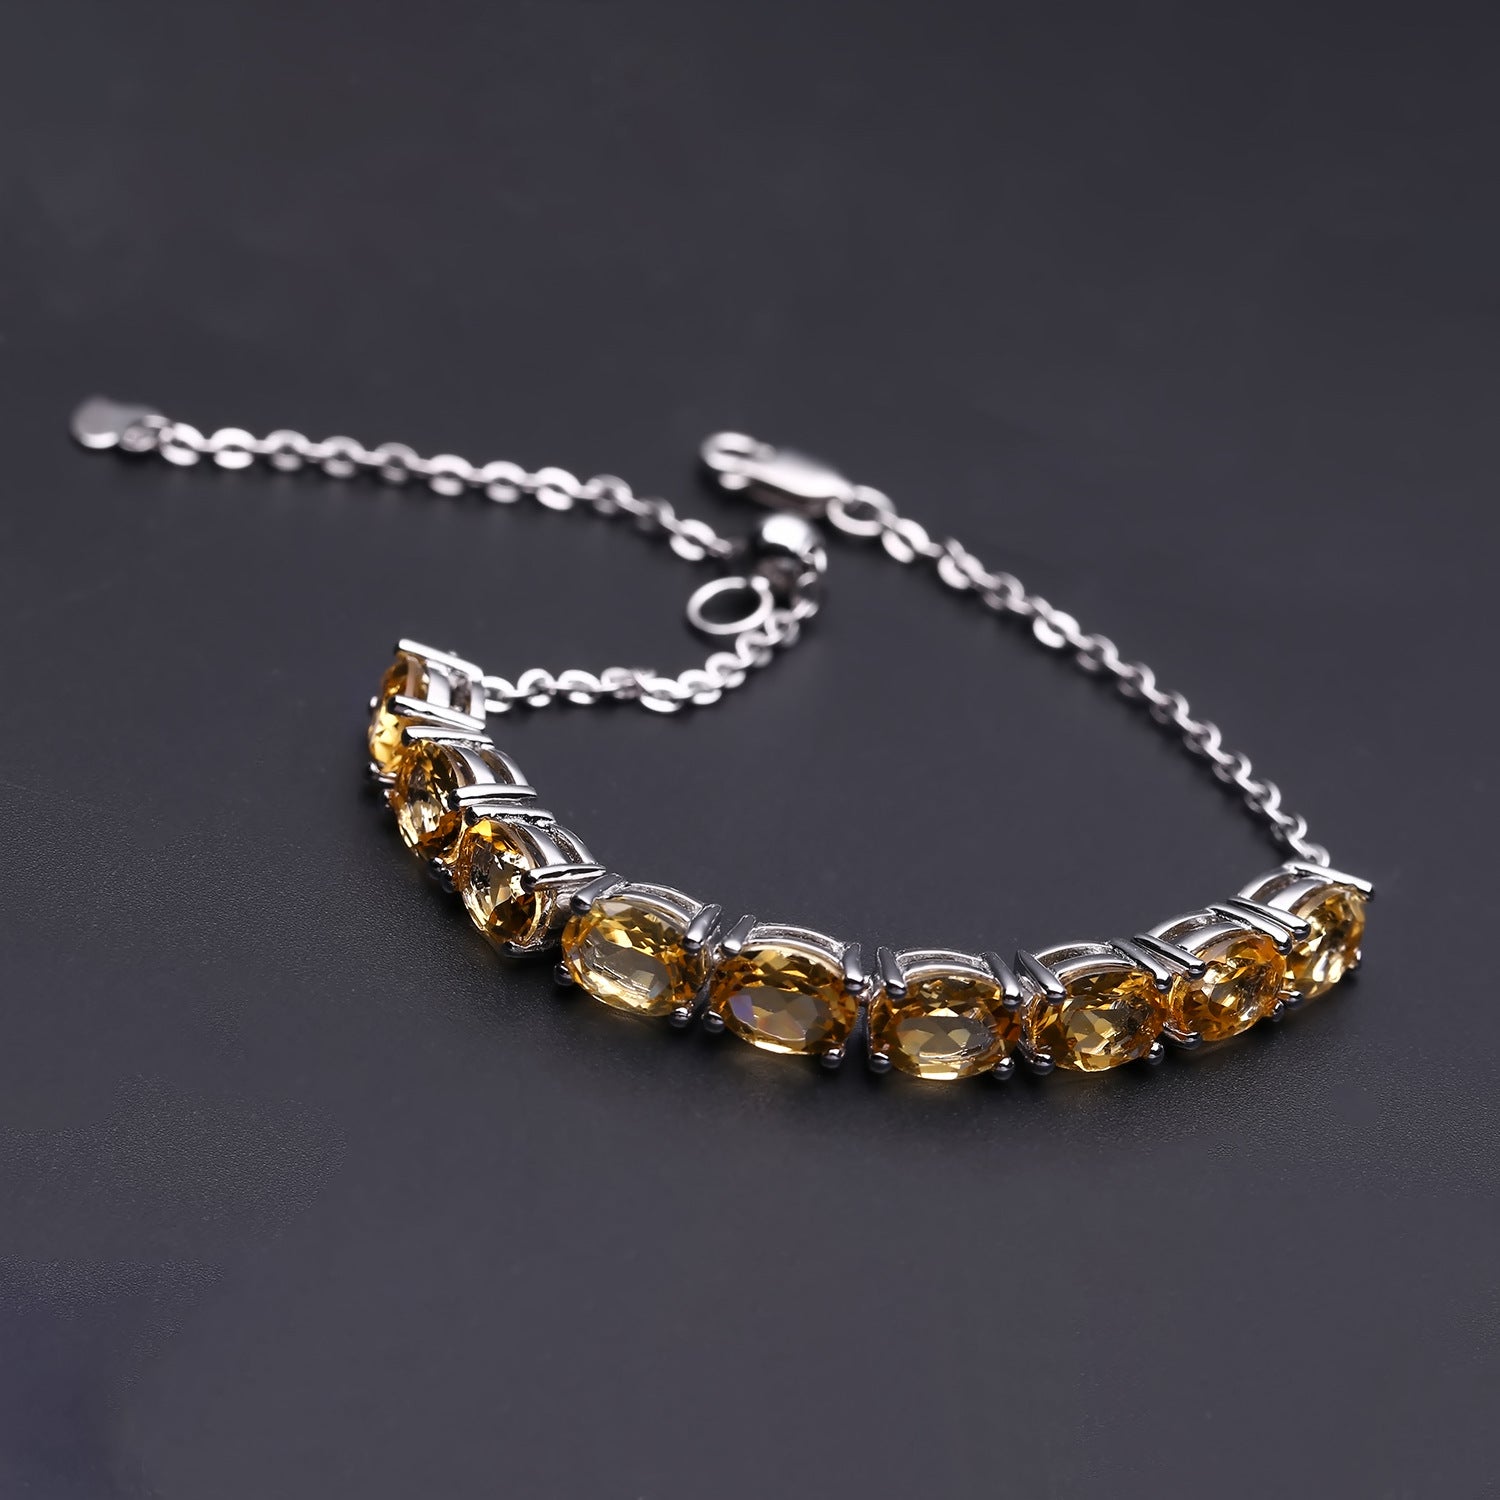 Luxury S925 Silver Natural Colour Crystal Bracelet for Women